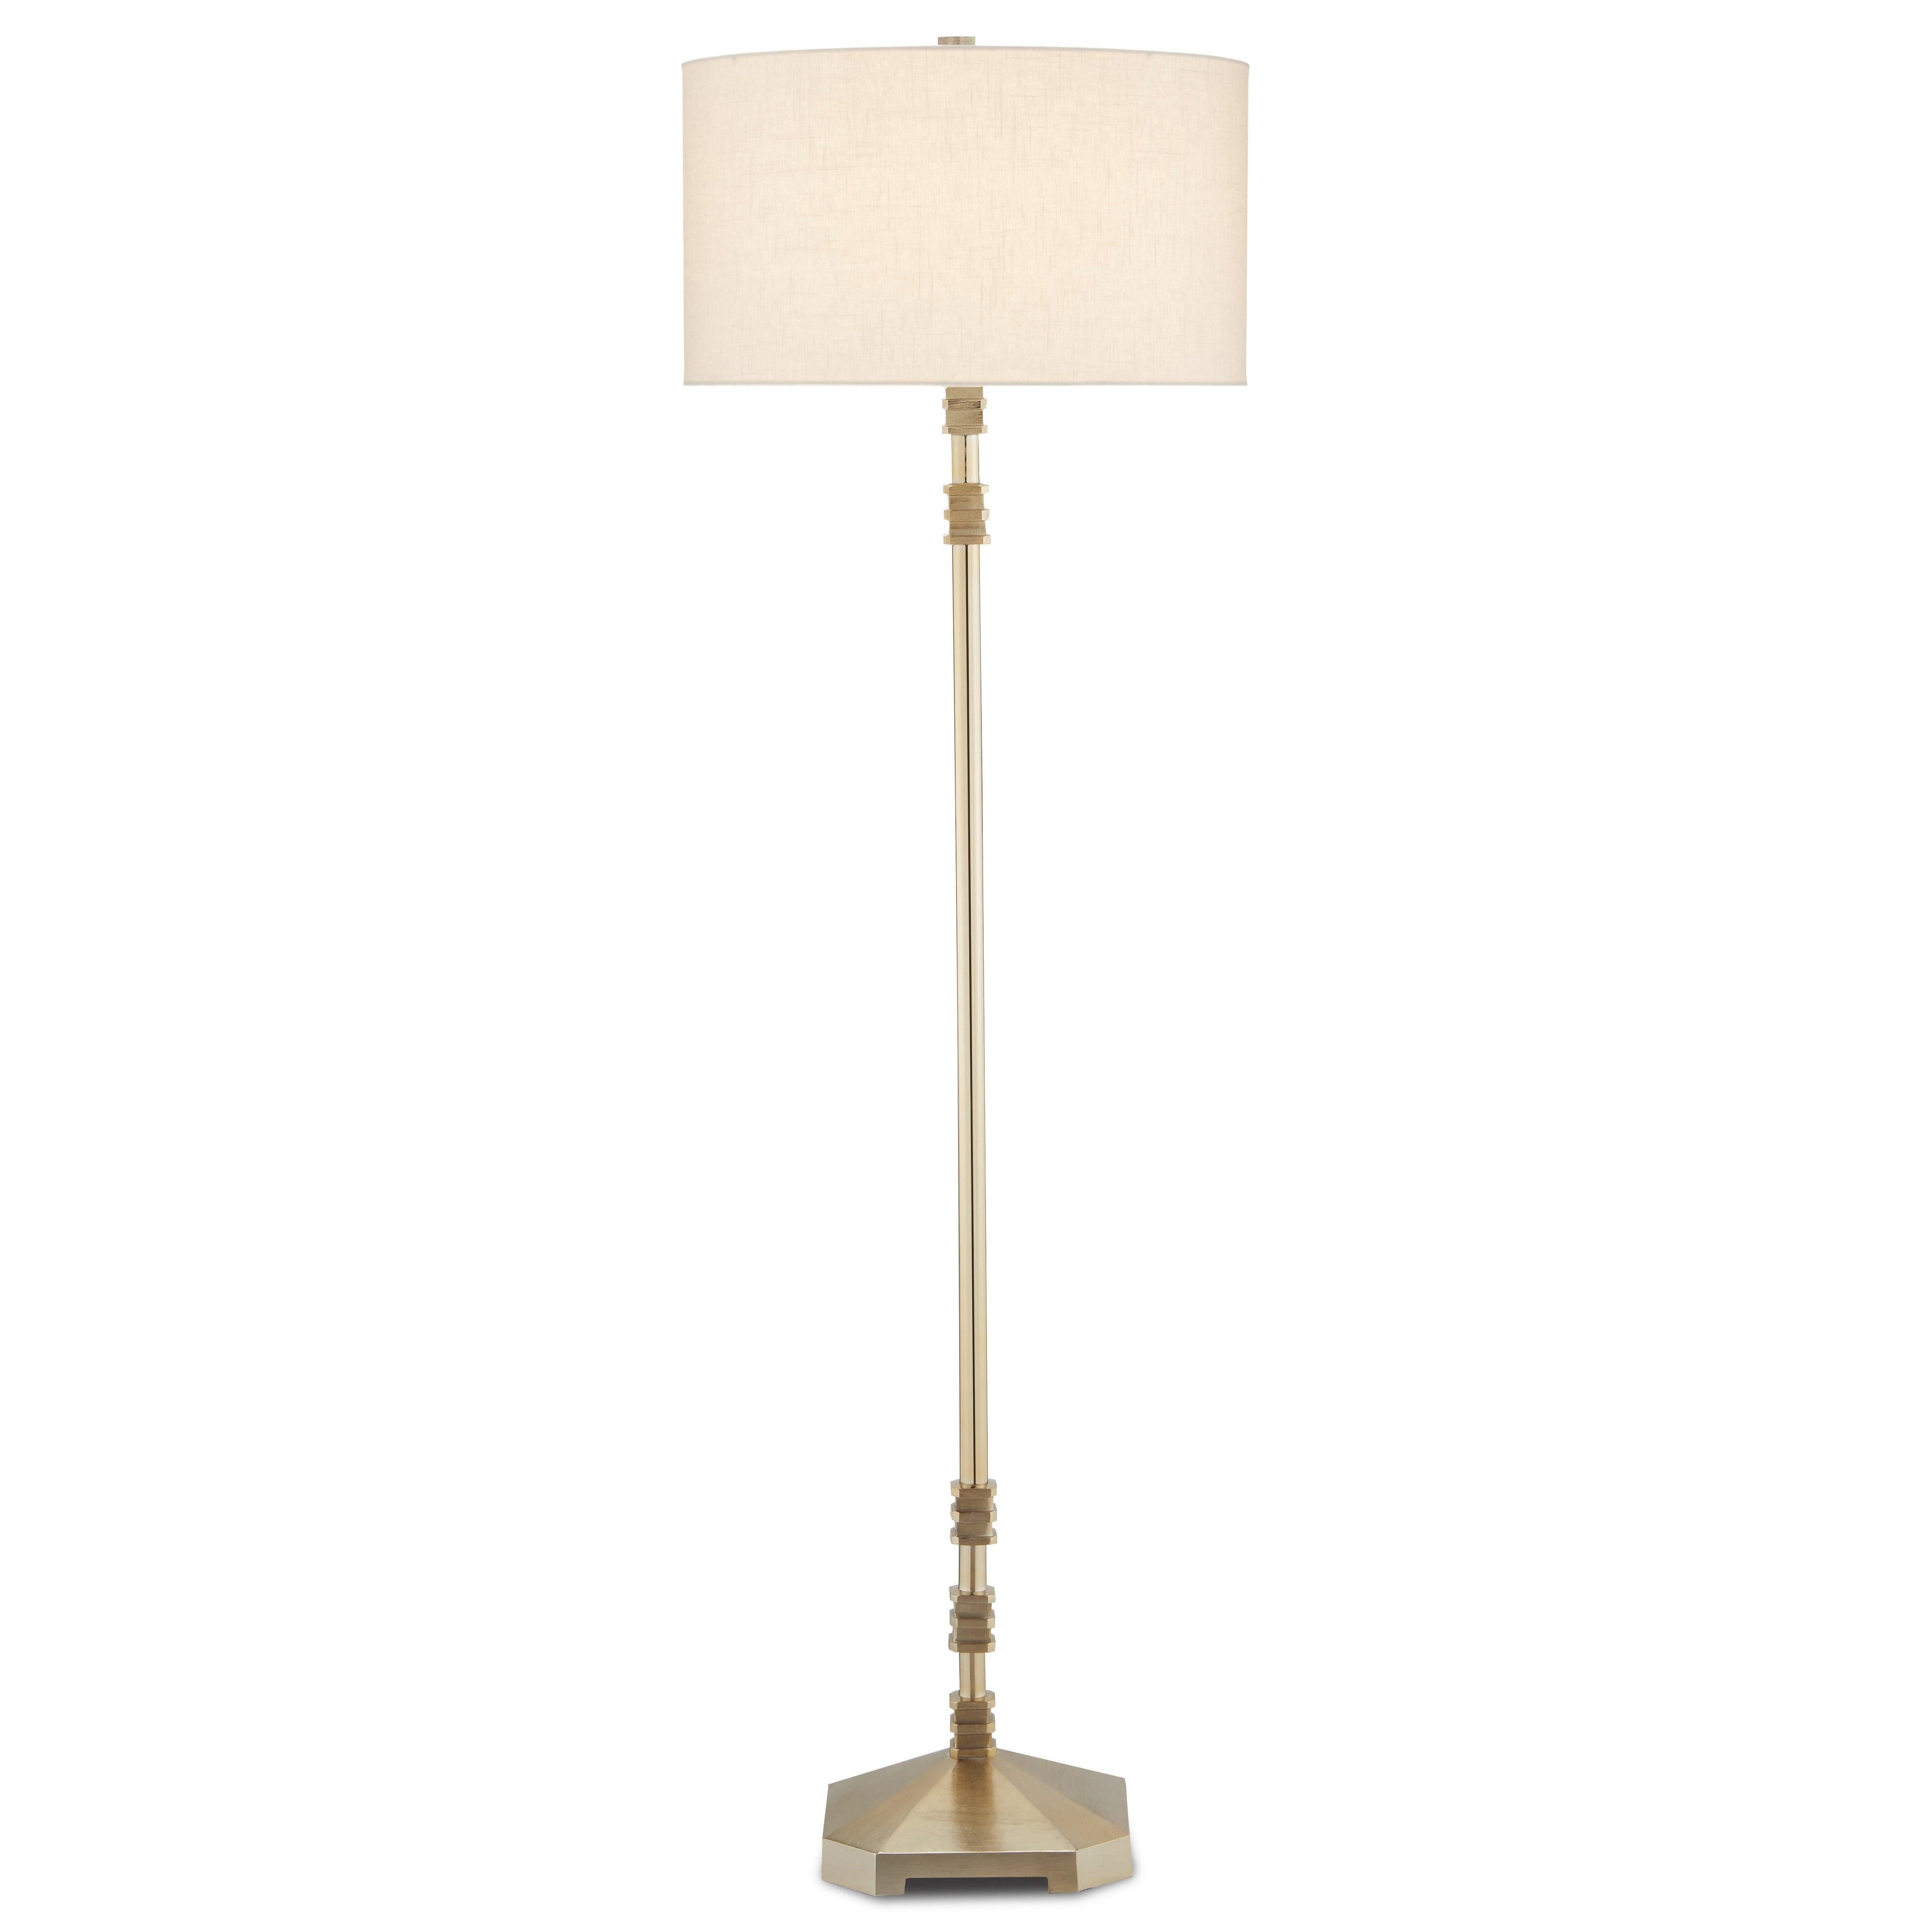 Currey and Company - Pilare Floor Lamp - 8000-0098 | Montreal Lighting & Hardware